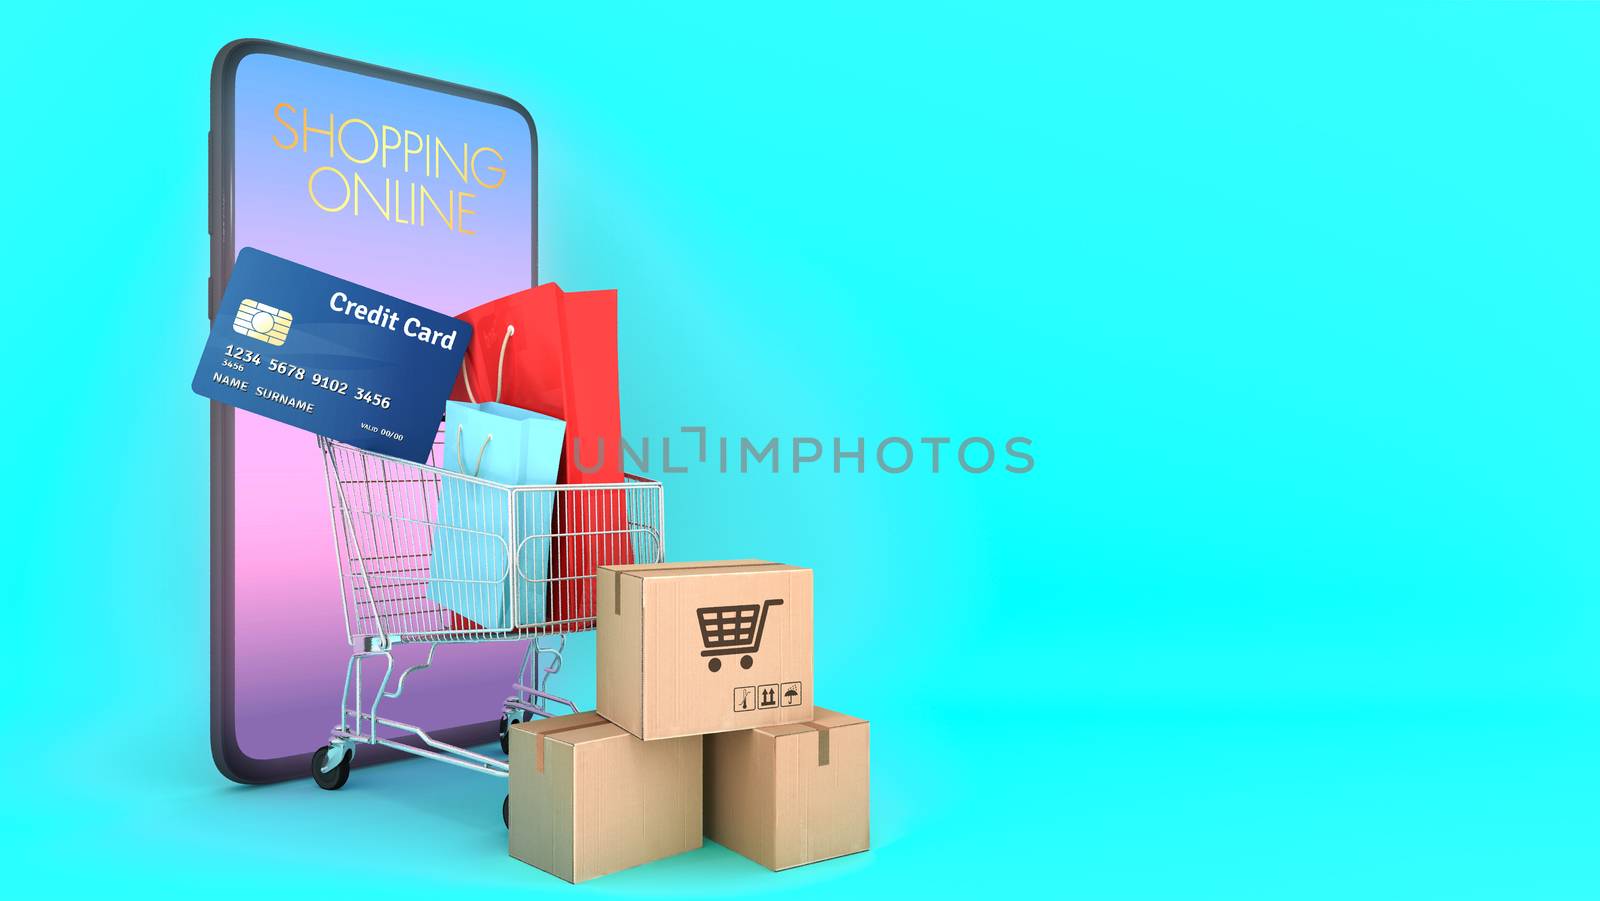 Many Paper boxes and Colourful paper shopping bags and credit card in a shopping cart appeared from smartphones screen., shopping online or shopaholic concept, 3D rendering. by anotestocker